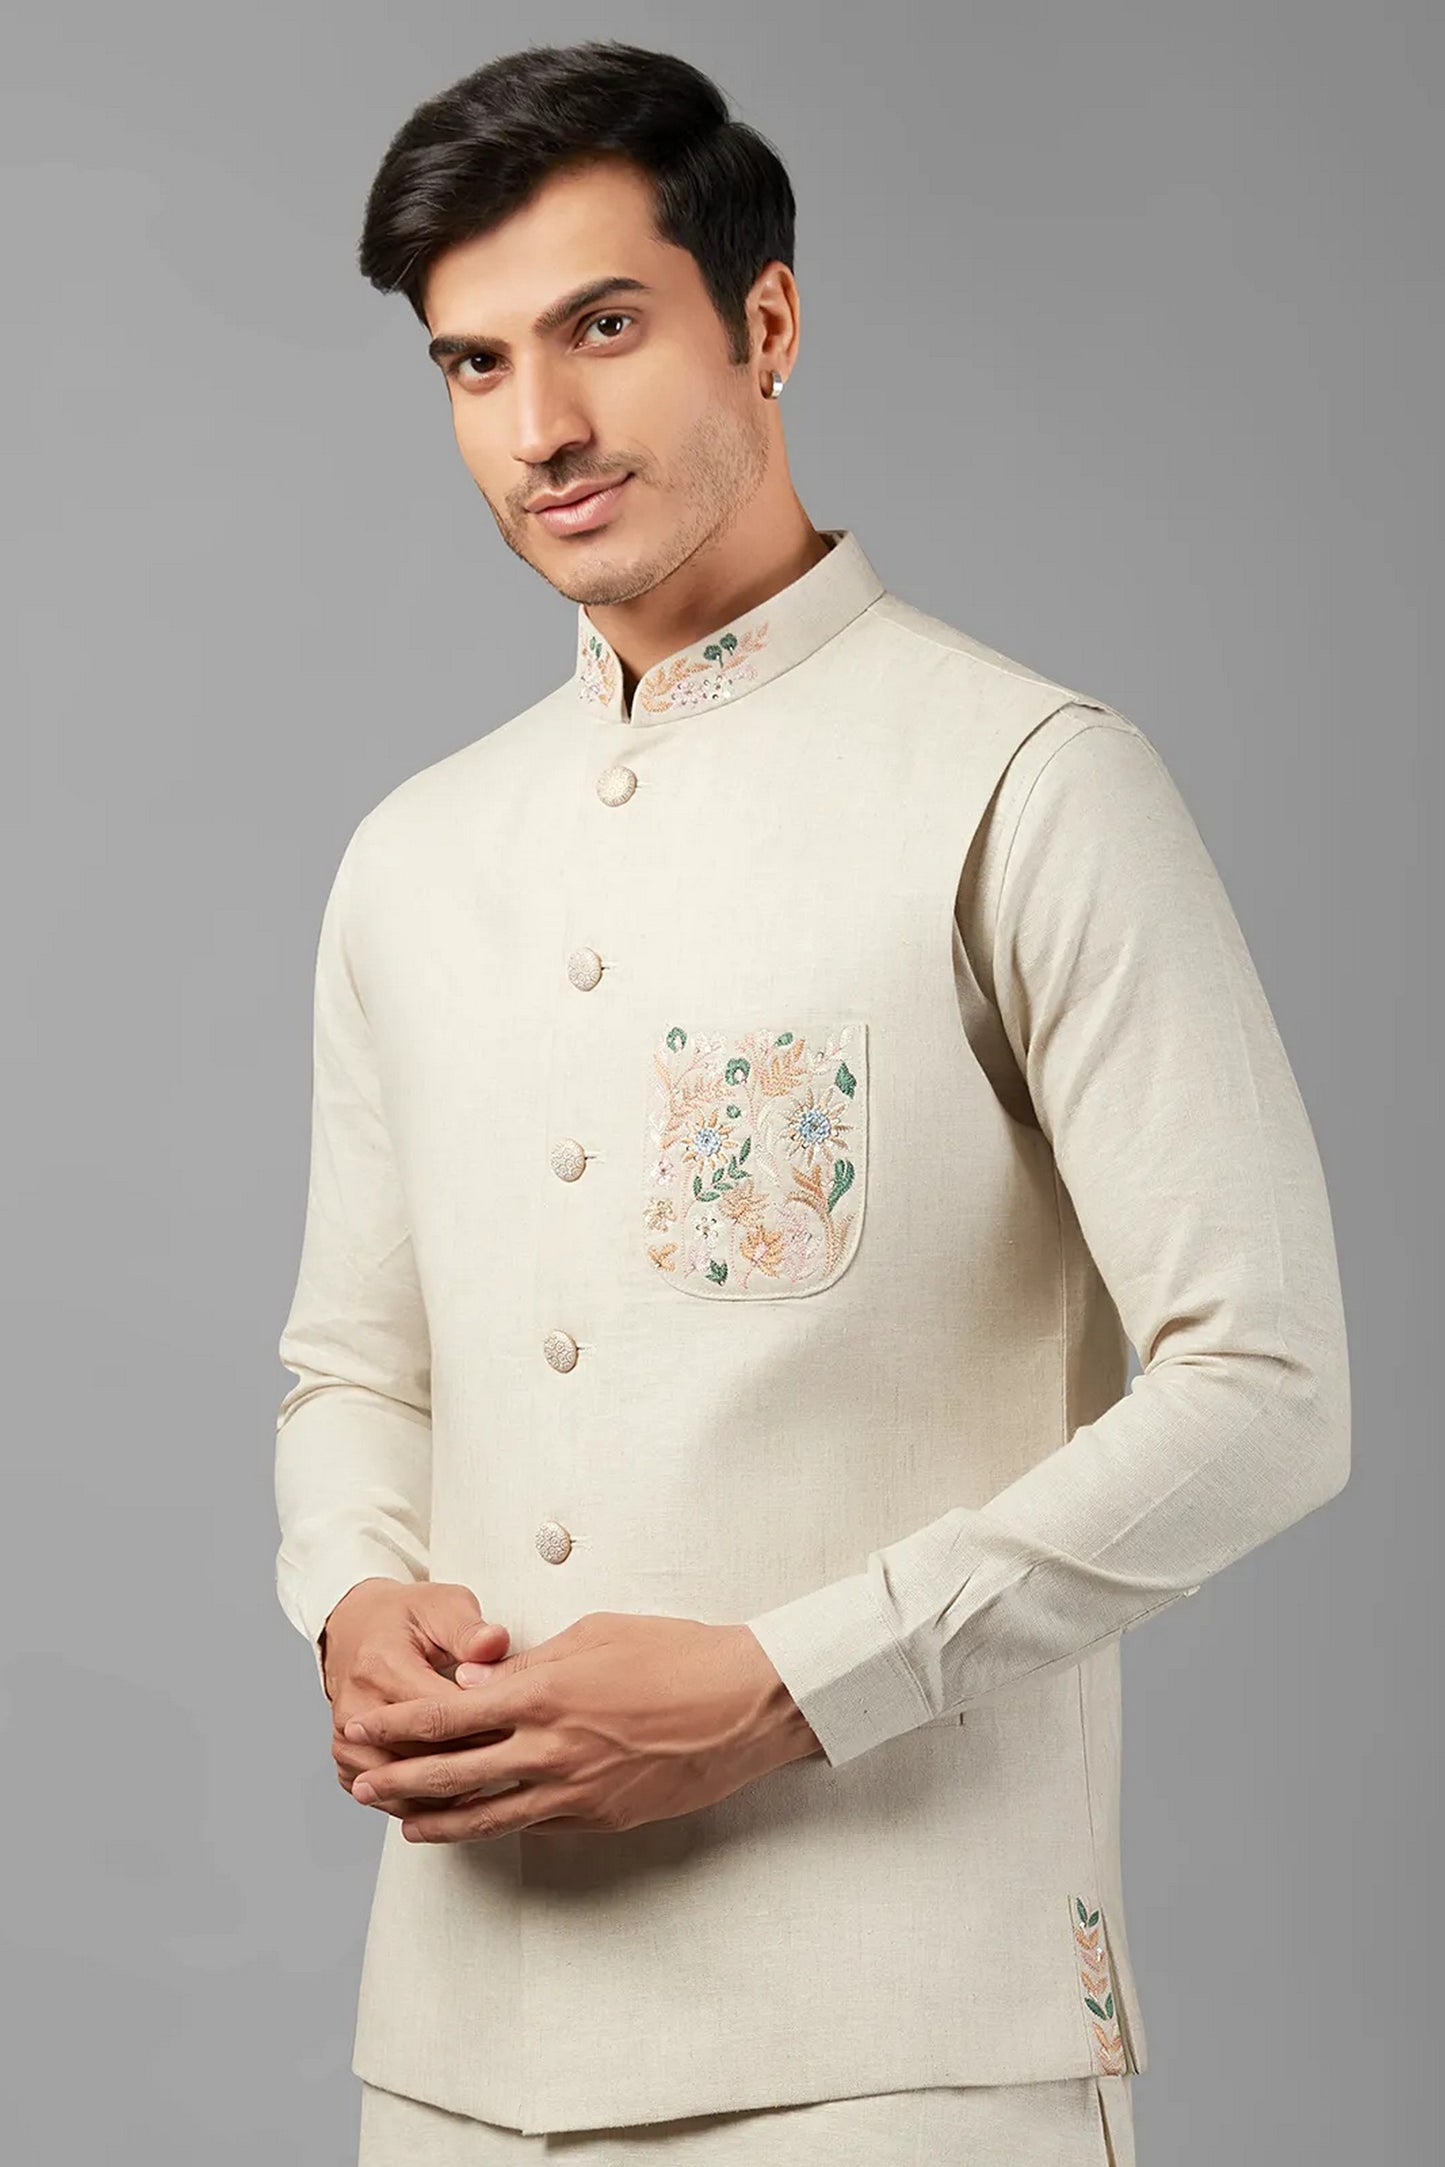 Off White Linen Men's Wedding Suit Waistcoat, Kurta with Pant - Embroidery Work